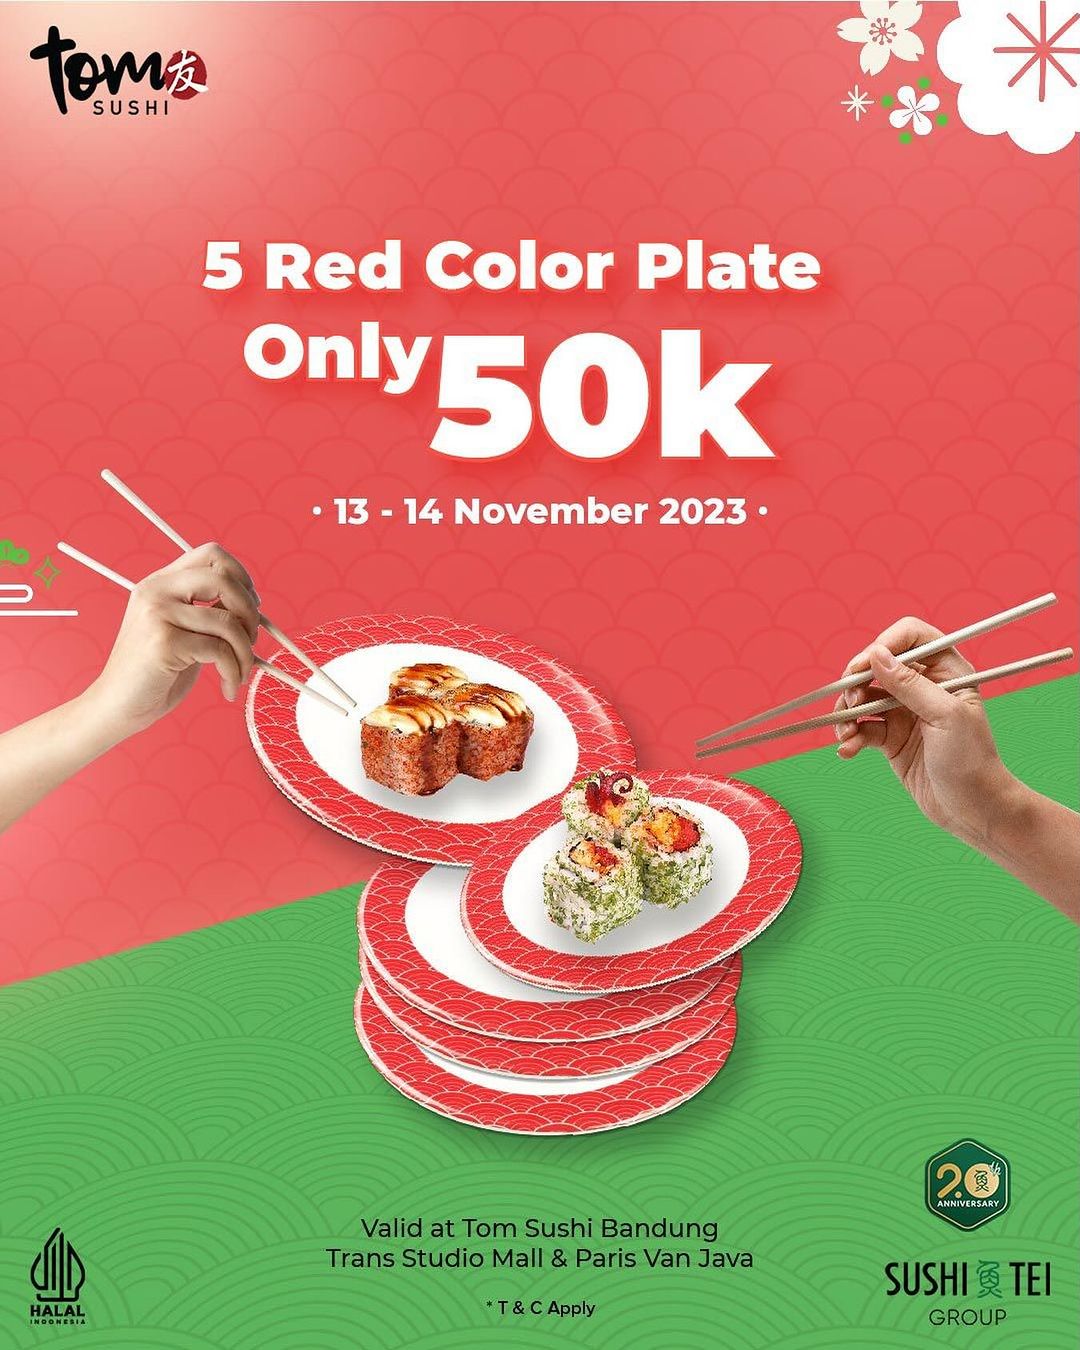 TOM SUSHI Promo 5 Red Color Plate Only IDR 50K